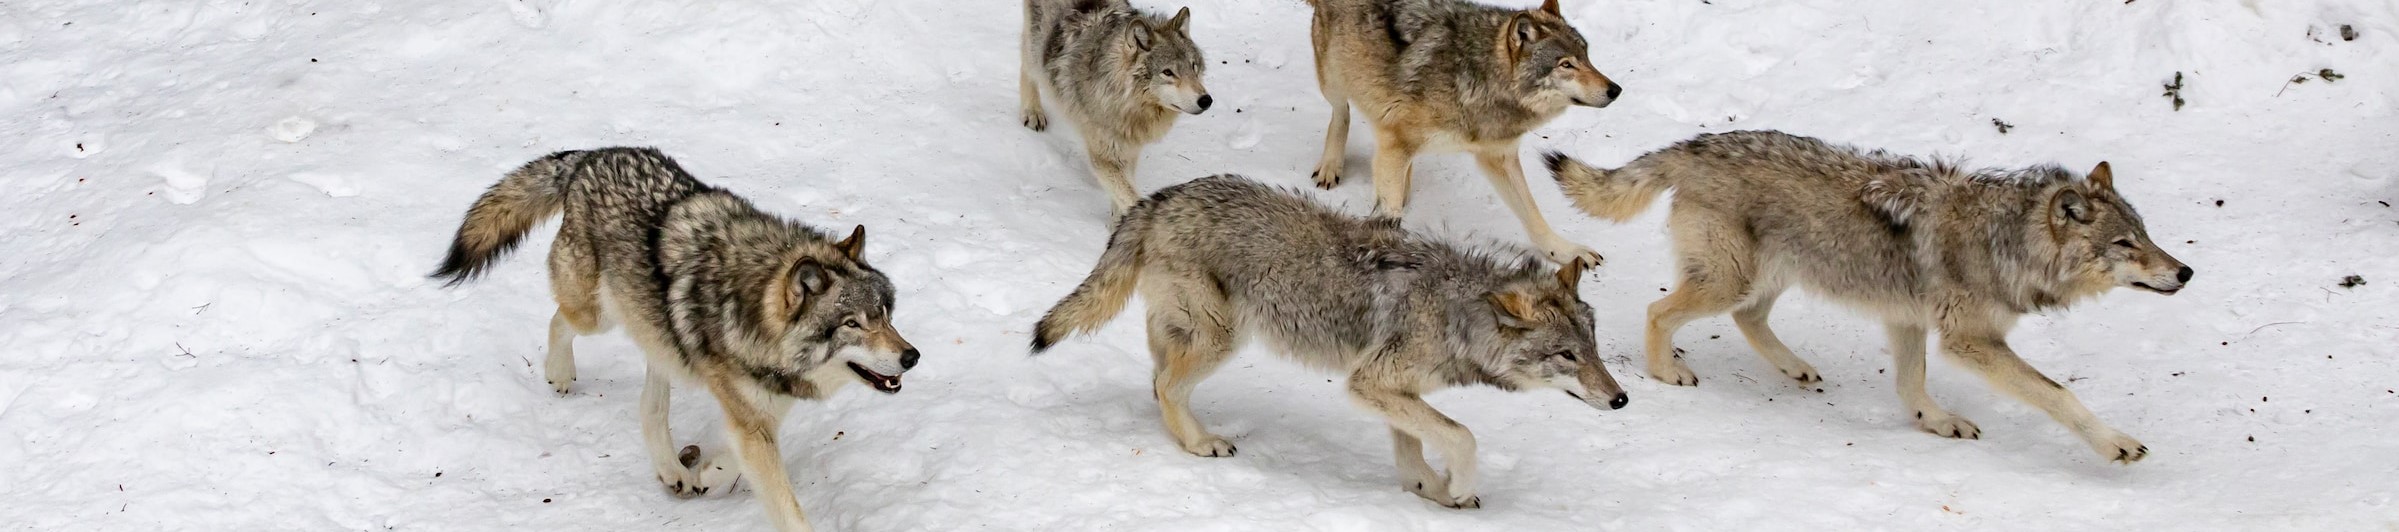 Pack of wolves running through snow, illustrating the wolf packs central tot he Redrock case study